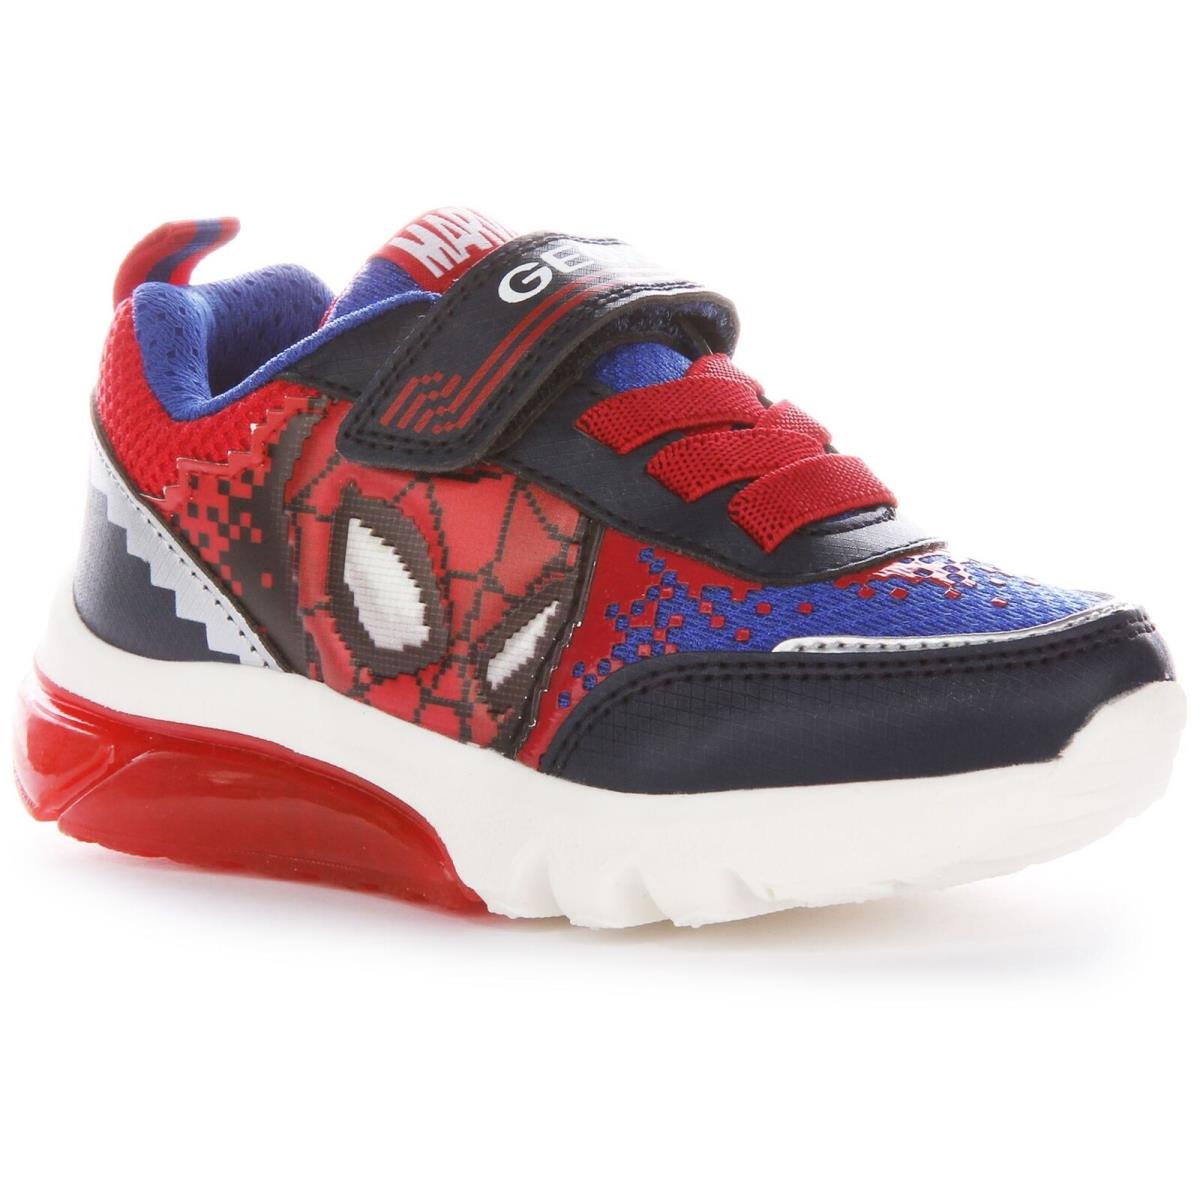 Geox J Ciberdrone F Boys Shoes In Navy Red Size US 5 - 13